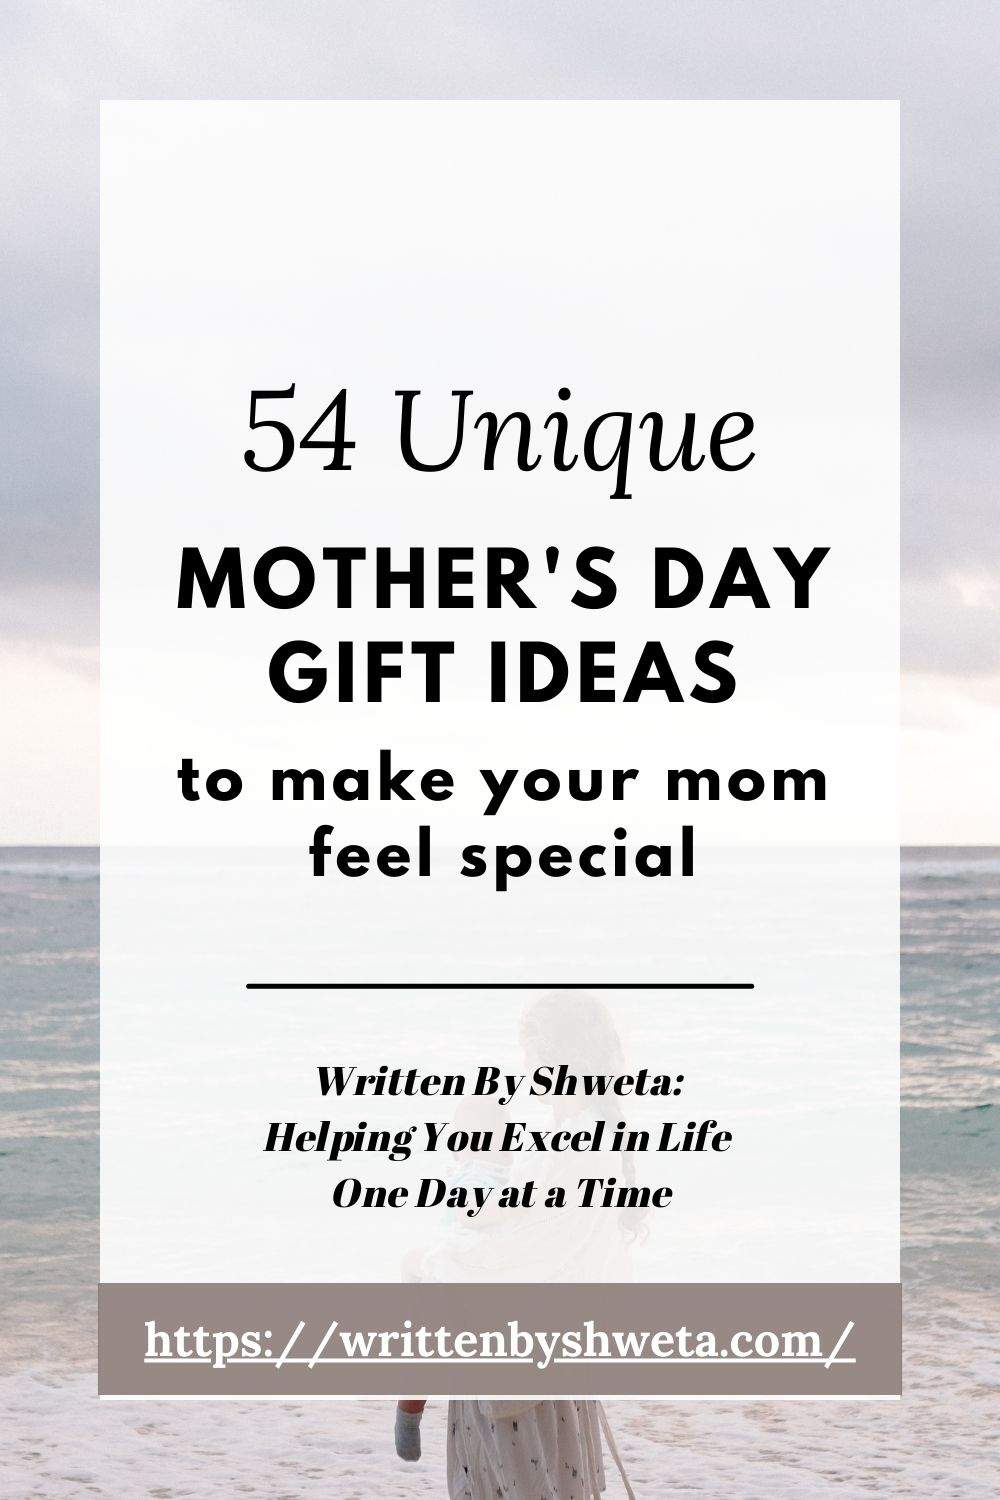 's Day Gift Ideas for Your Mom